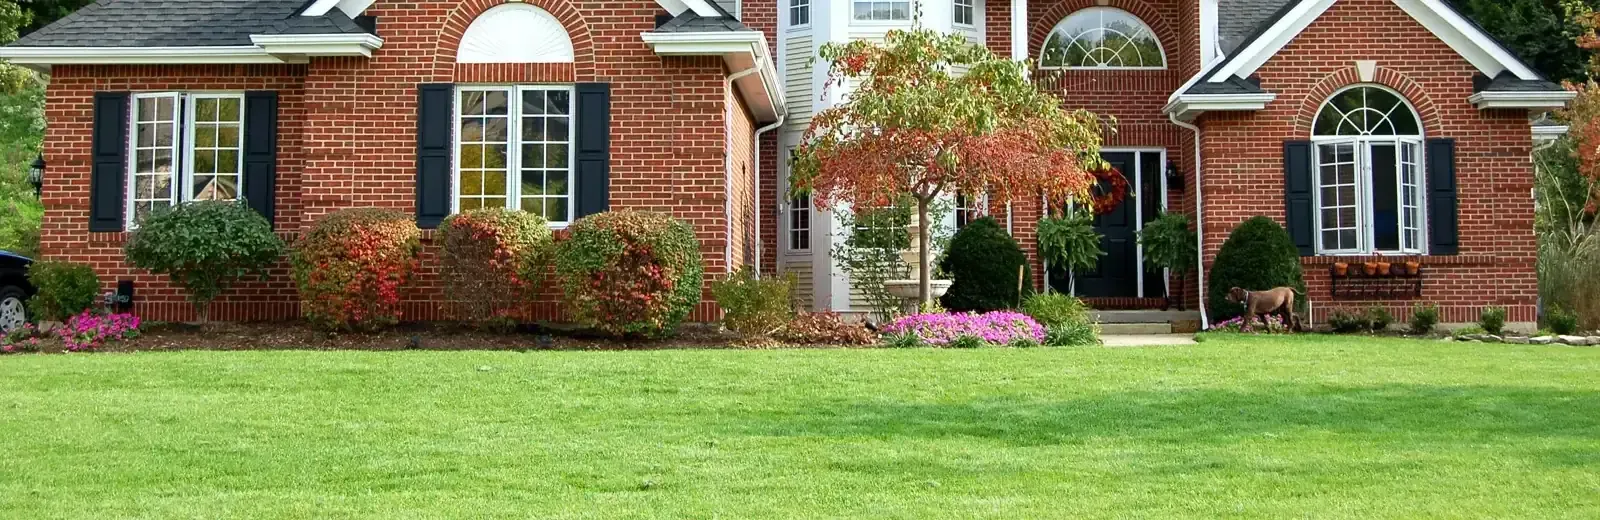 brick home with nice healthy front yard